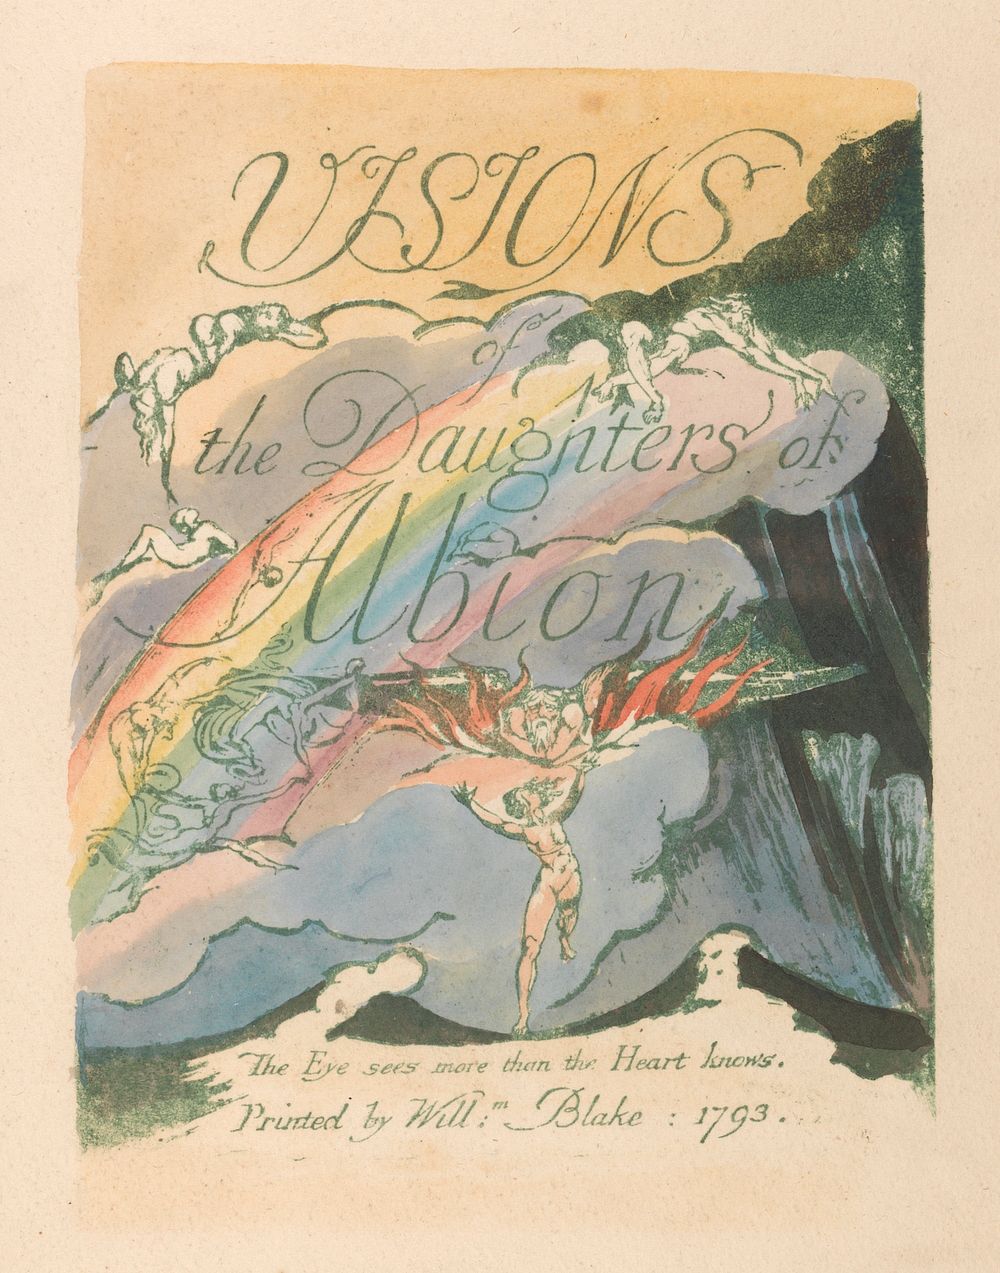 Visions of the Daughters of Albion, Plate 2, Title Page by William Blake.